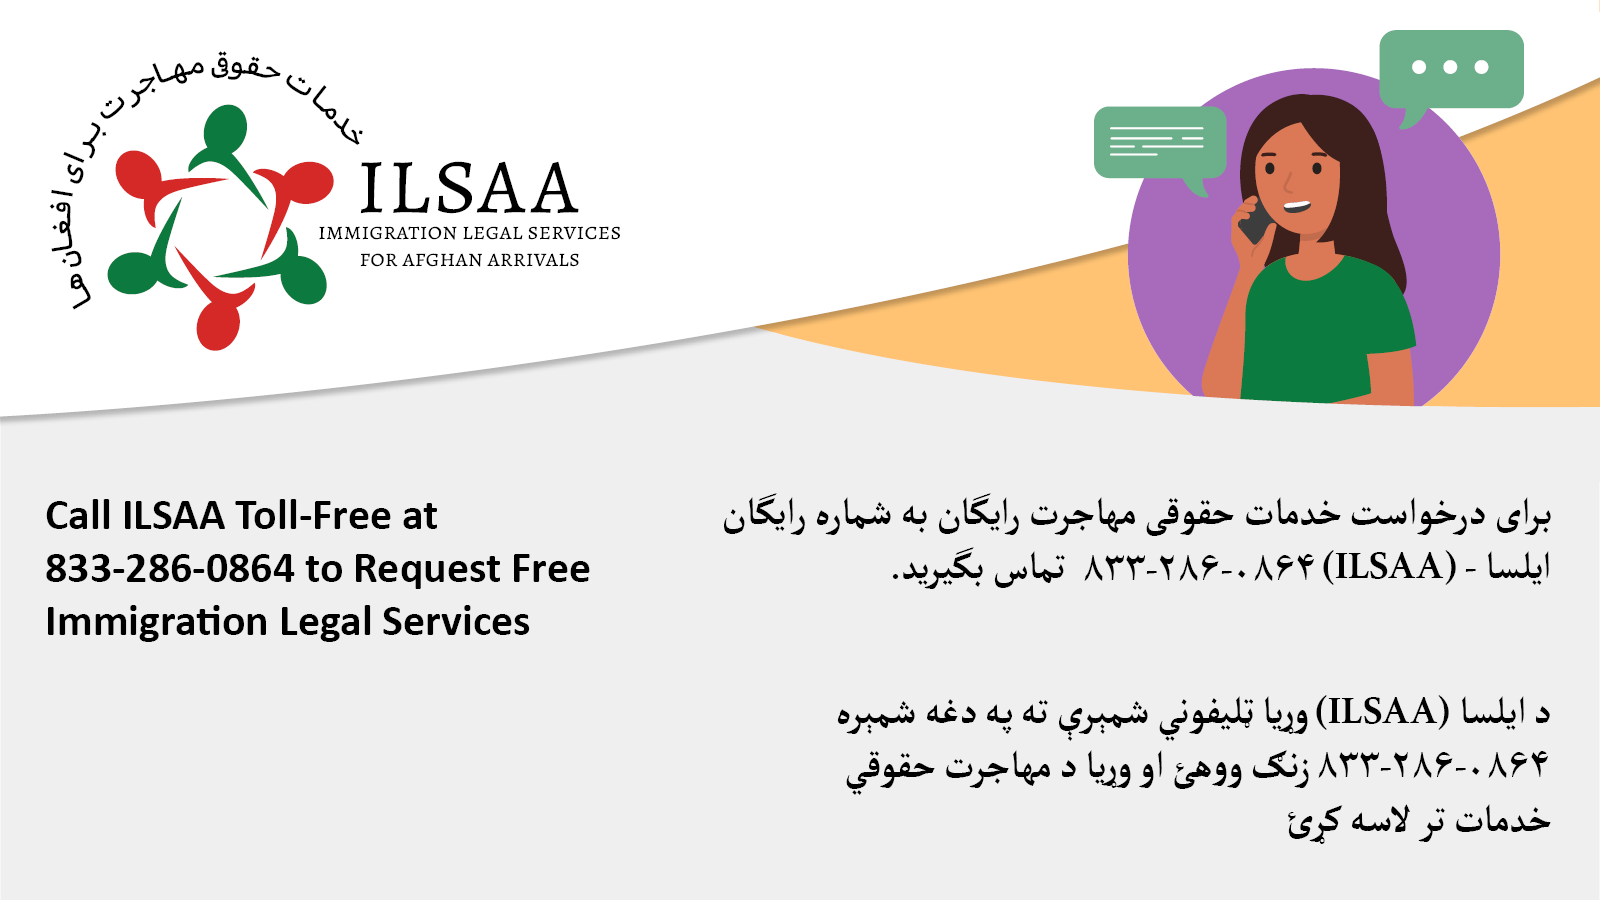 Call ILSAA Toll-Free at 833-286-0864 to Request Free Immigration Legal Services 